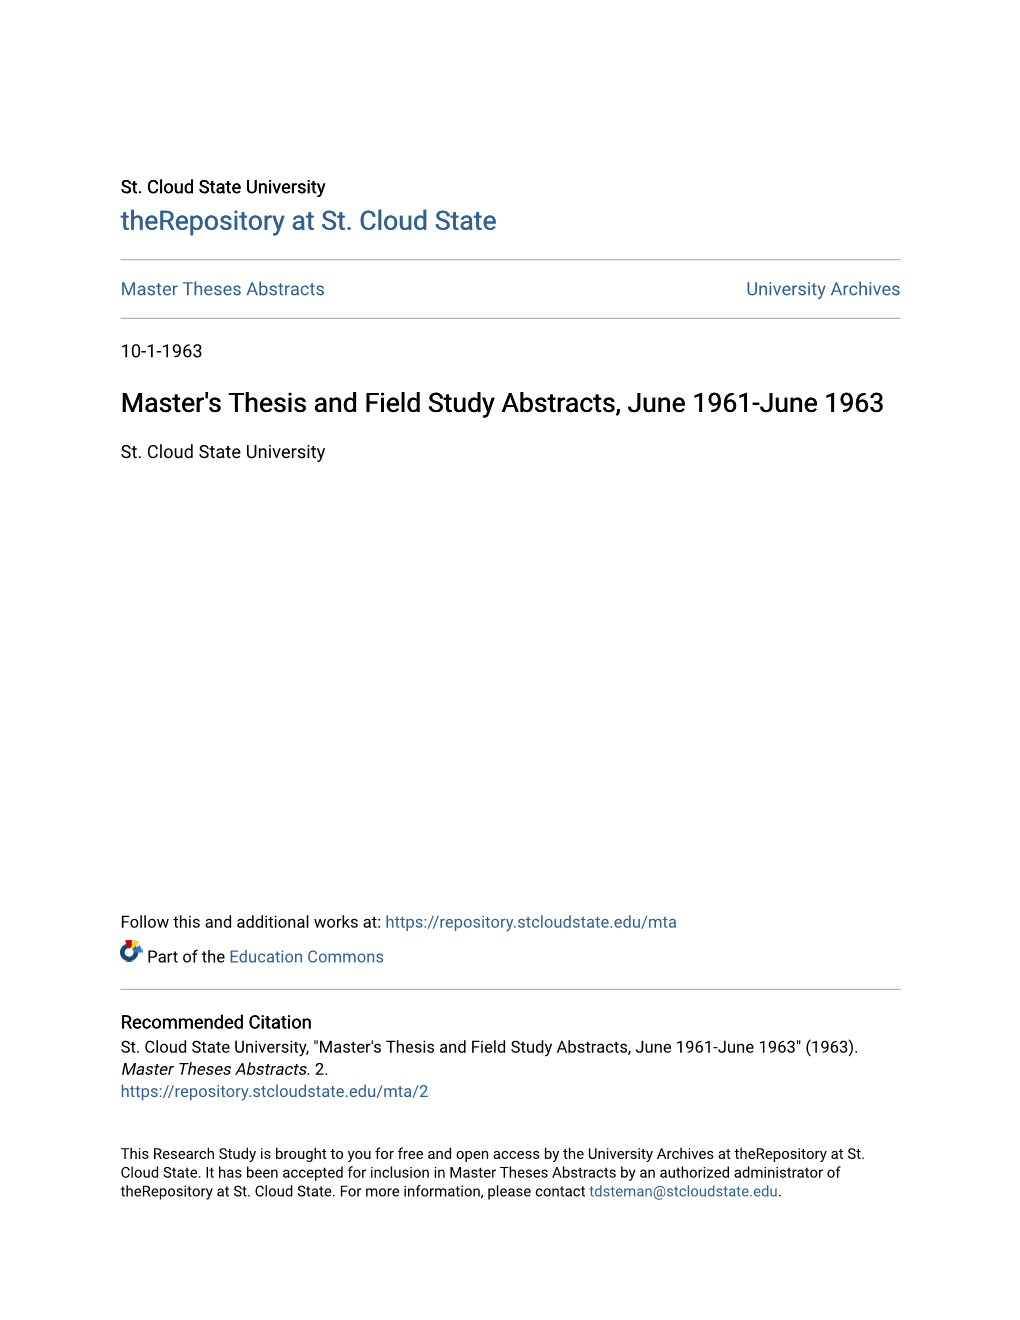 Master's Thesis and Field Study Abstracts, June 1961-June 1963